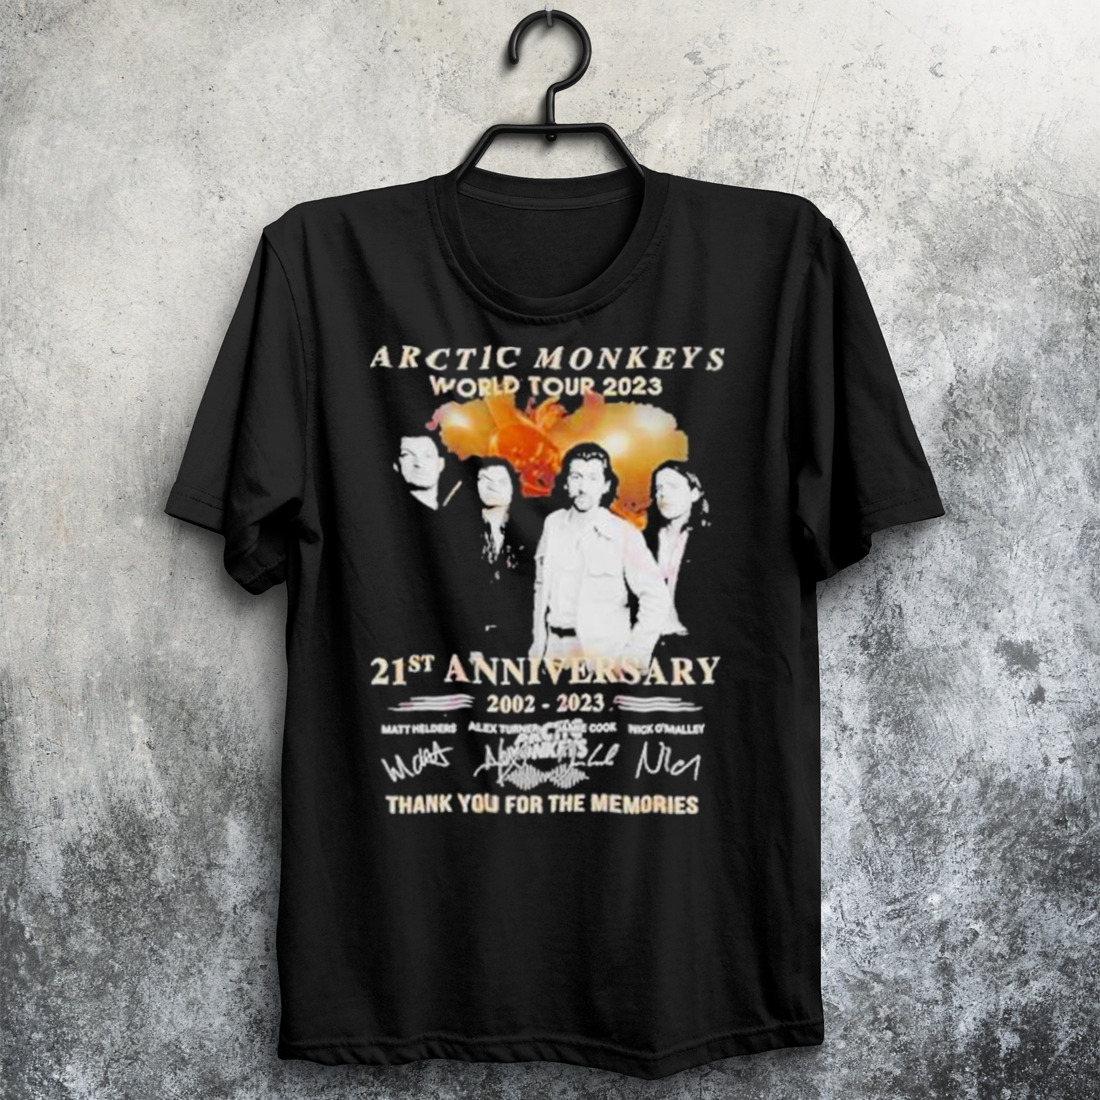 Arctic Monkeys World Tour 2023 21st Anniversary 2002 – 2023 Thank You For The Memories T-Shirt